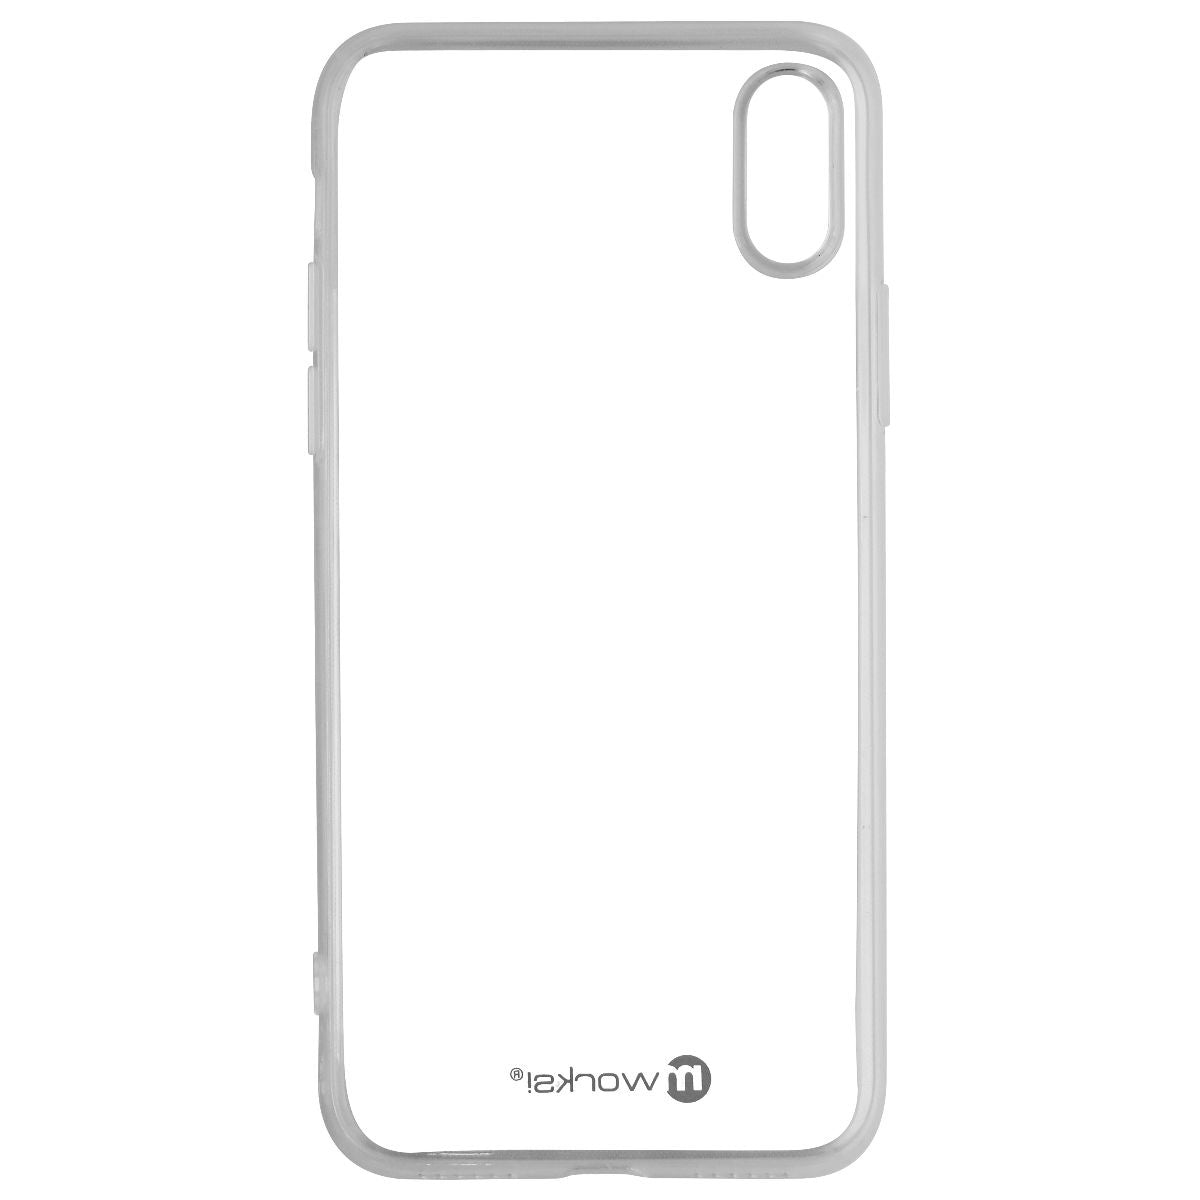 mWorks! mCASE! Protective Case for Apple iPhone X/XS - Clear Cell Phone - Cases, Covers & Skins mWorks!    - Simple Cell Bulk Wholesale Pricing - USA Seller